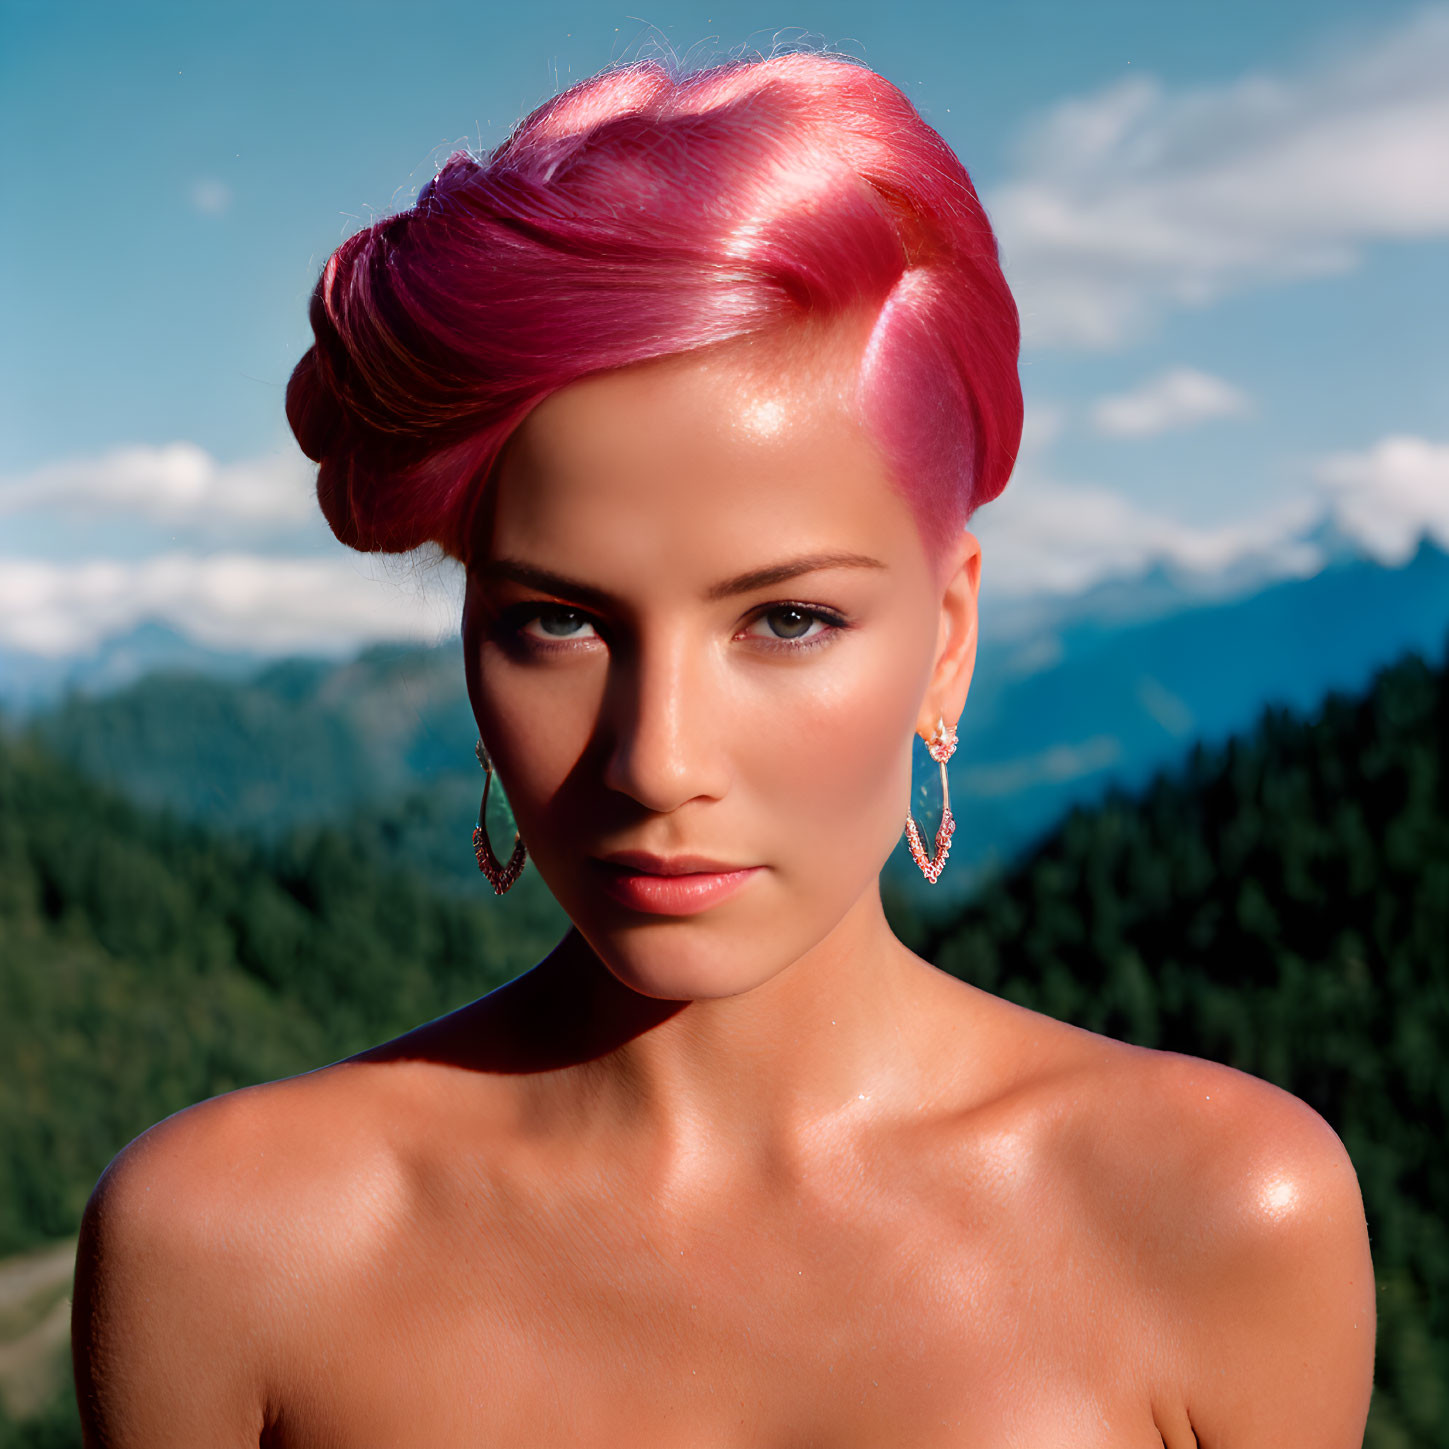 Vibrant pink updo hairstyle woman against mountain backdrop under blue sky